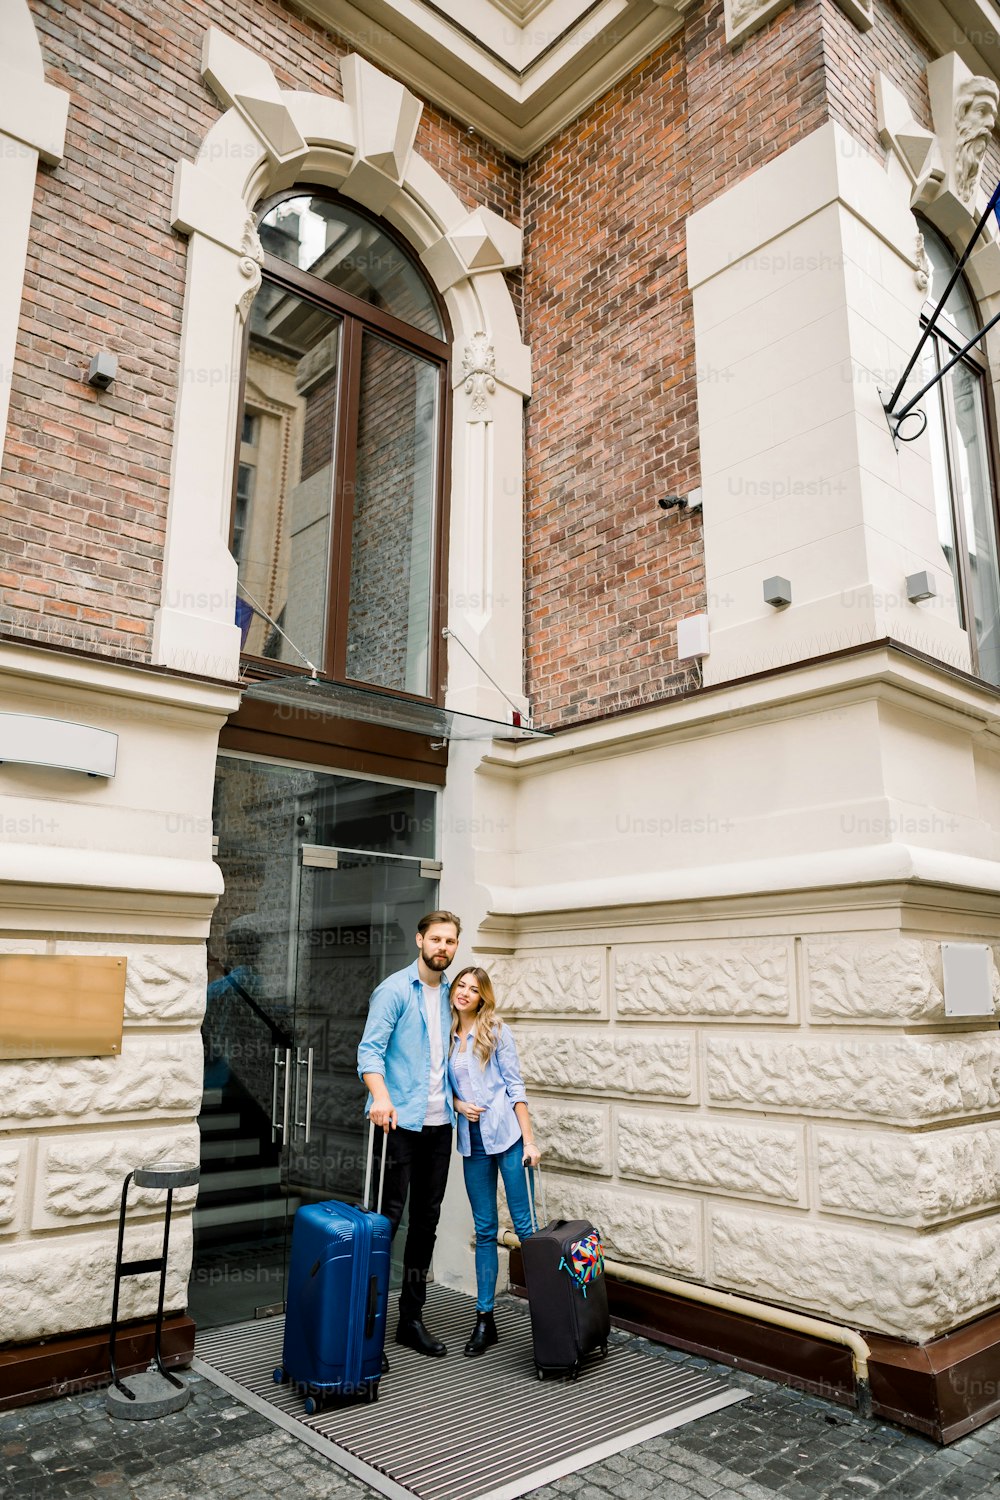 Picture of young couple entering hotel. Young man and woman standing near the old building city hotel, outdoors, holding suitcases.